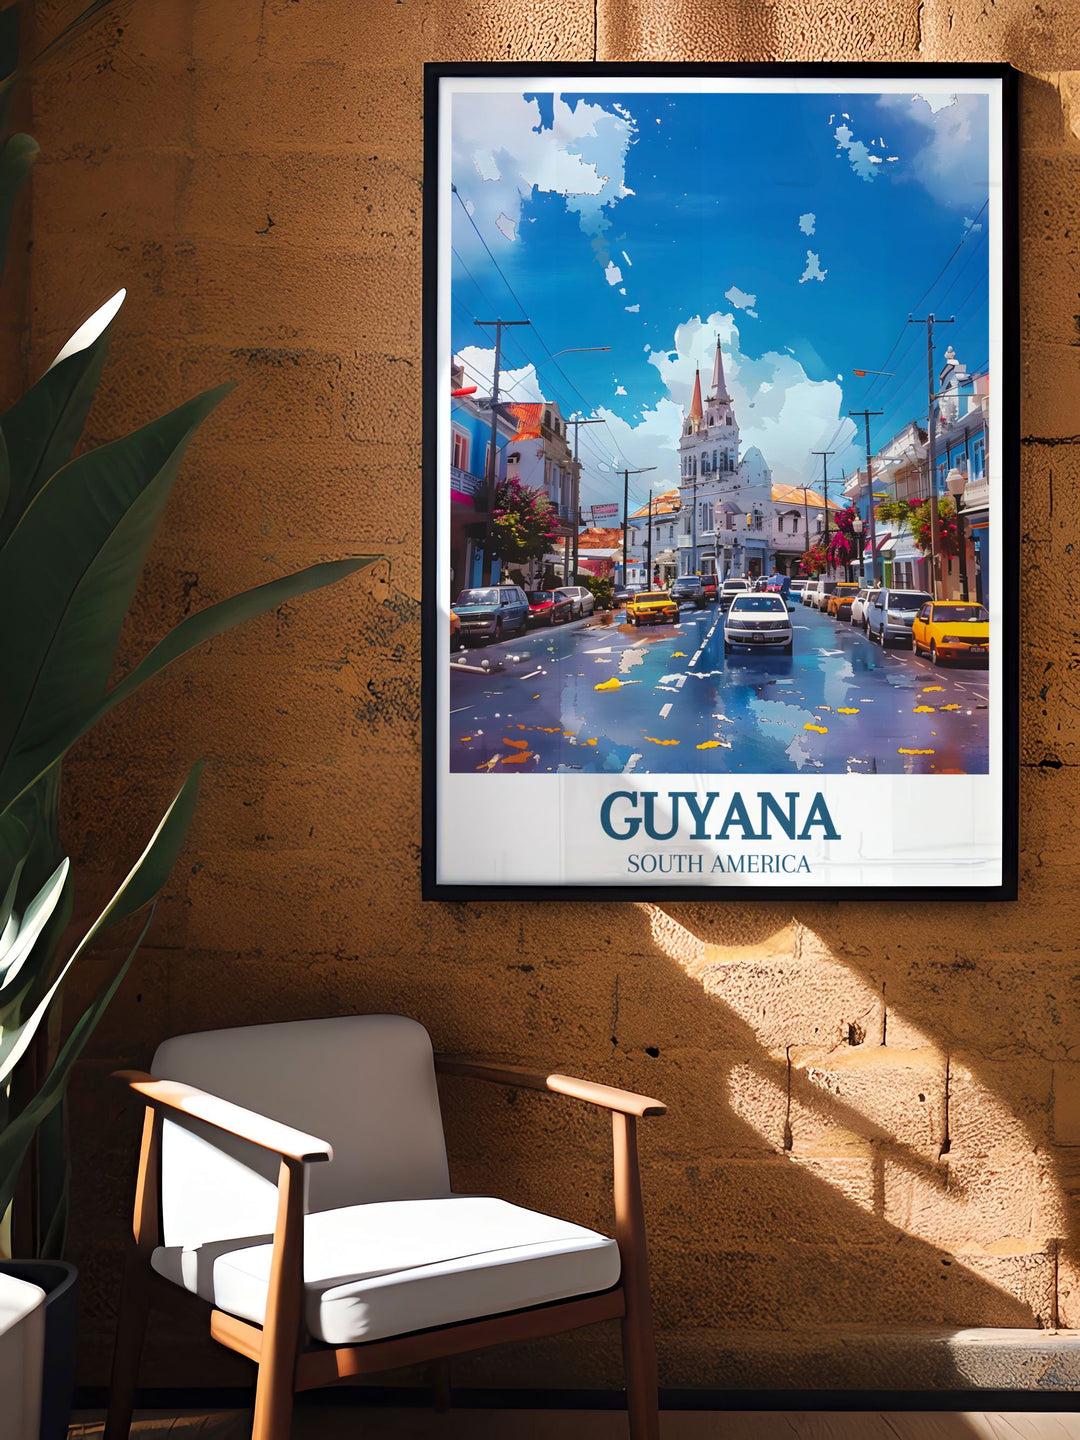 This travel poster of Georgetown captures the vibrant streets and colorful atmosphere of the city, showcasing its unique charm and lively spirit, perfect for adding a touch of Caribbean culture to your home decor.